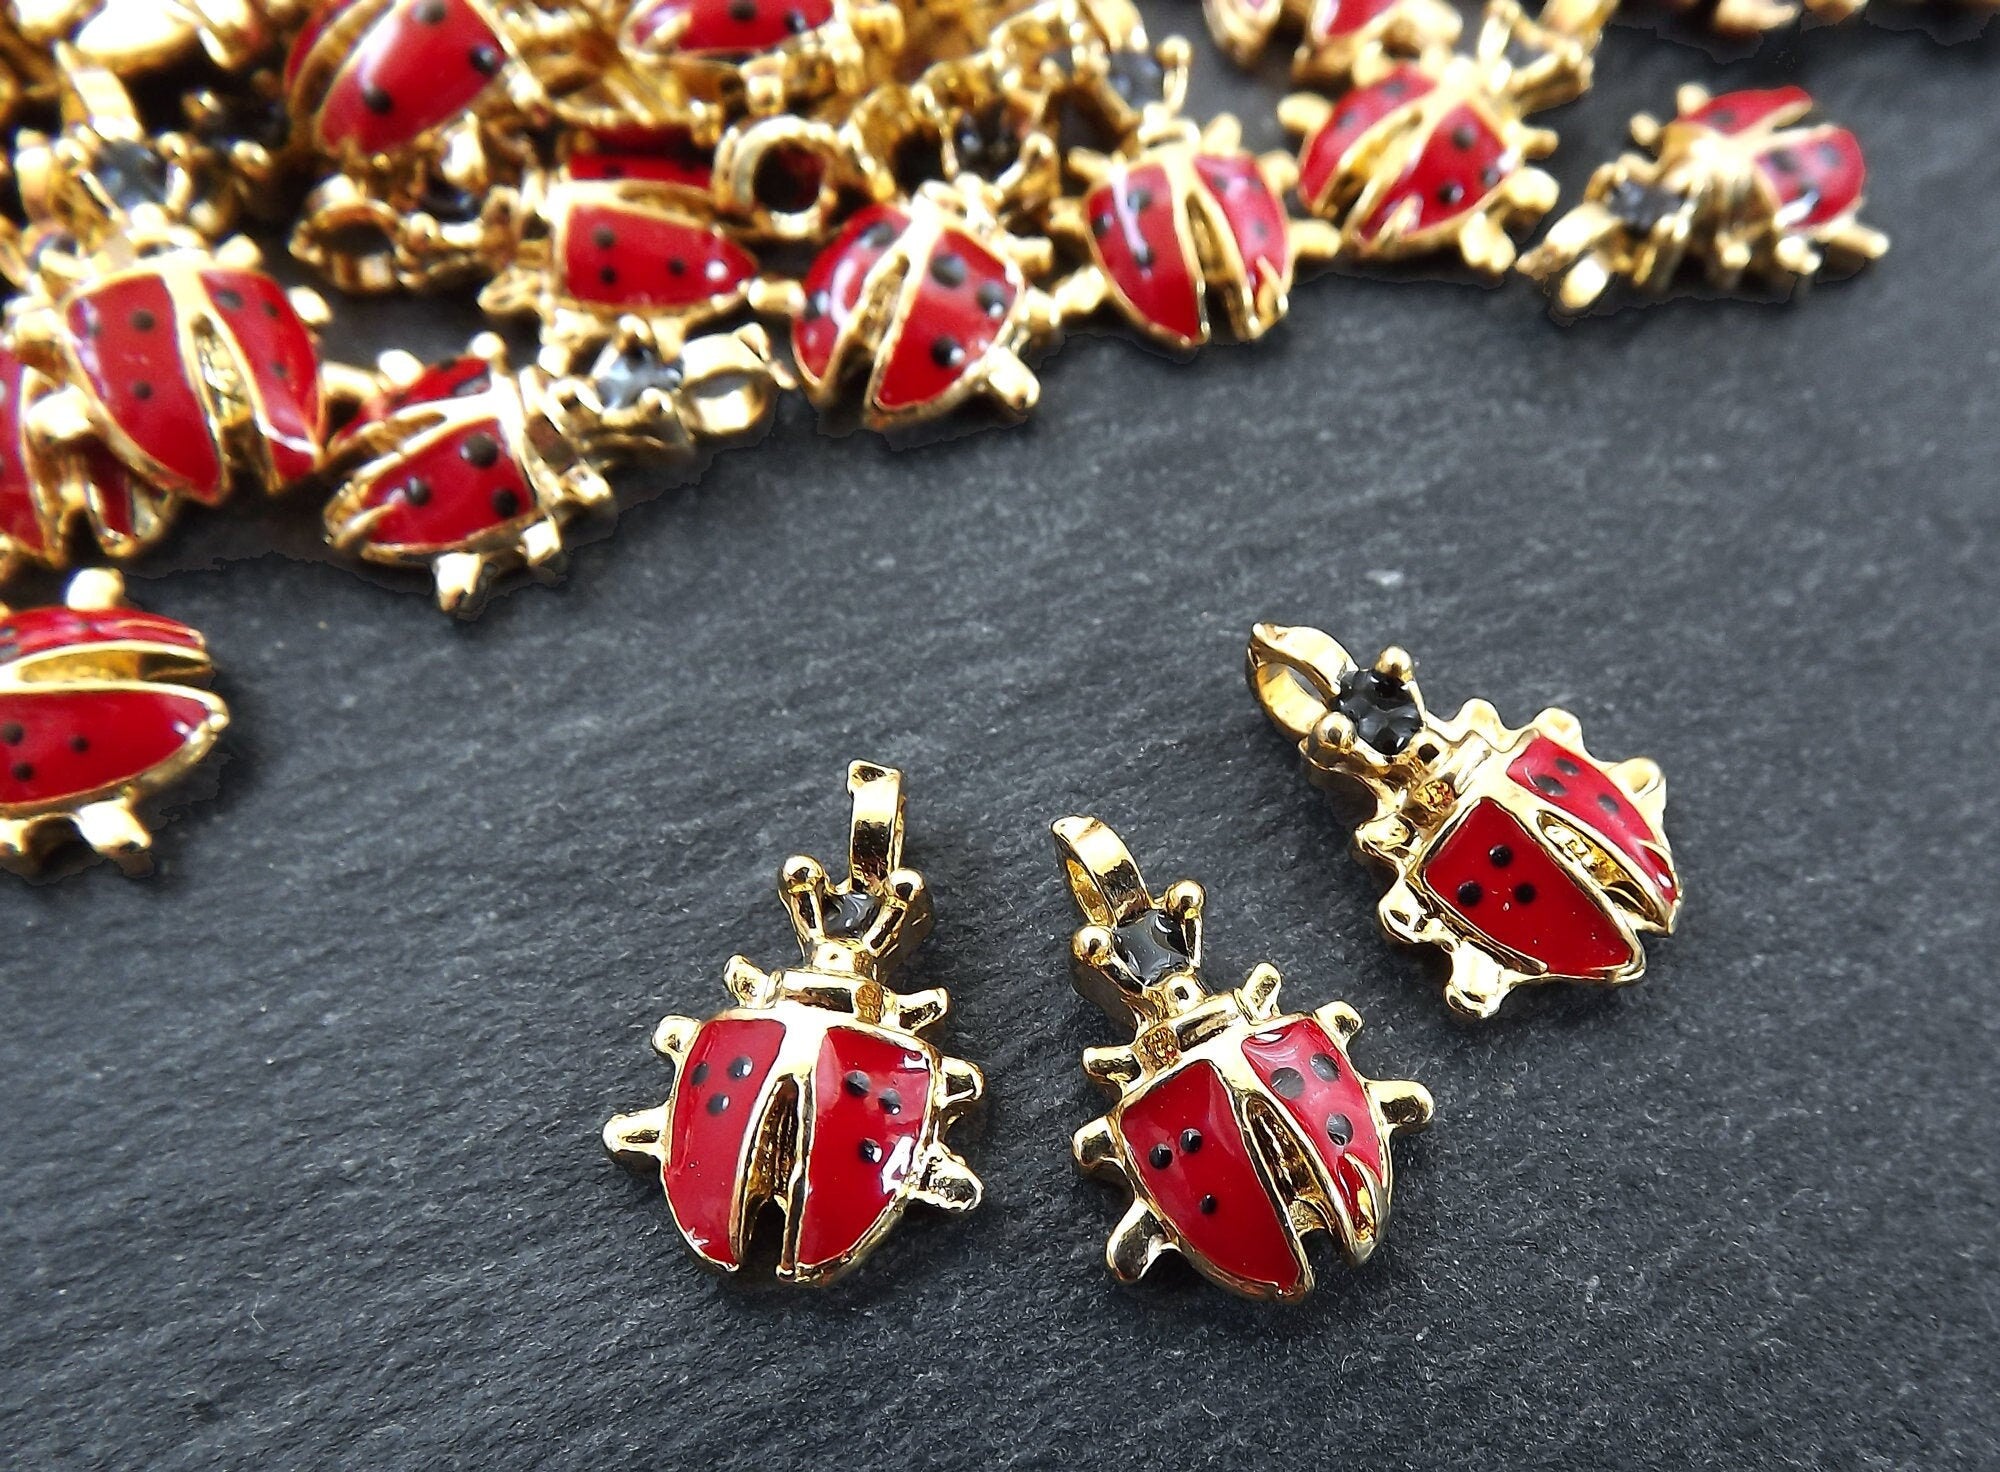 3 Ladybug Charms, Red Enamel Ladybird Charm, Insect Jewelry, Lucky Charm, 22k Matte Gold Plated